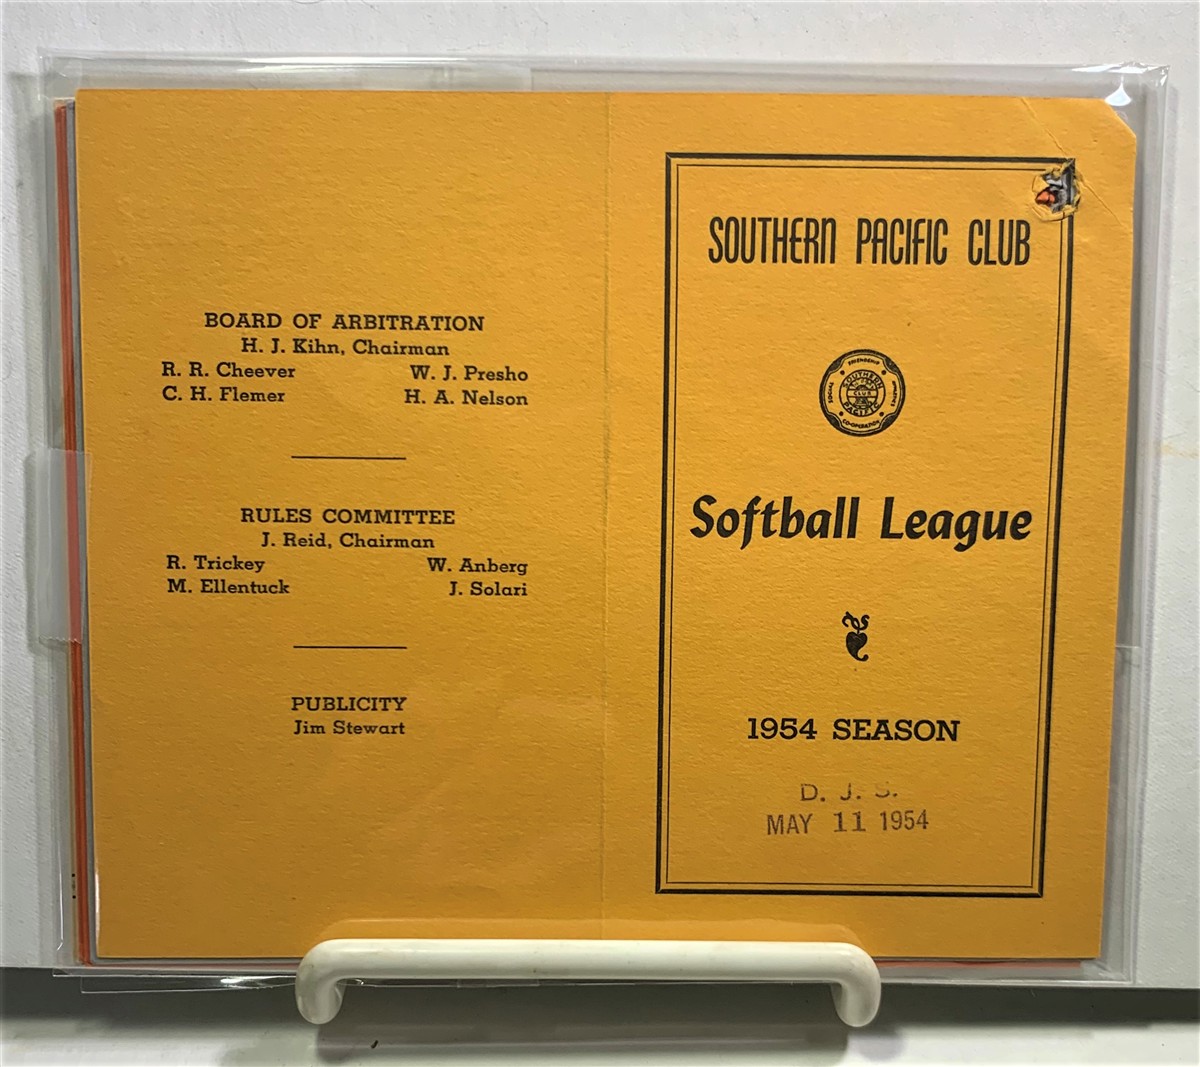 [EPHEMERA] [SOUTHERN PACIFIC CLUB] [SOFTBALL LEAGUE] - Group of 7 Schedule Cards for the Southern Pacific (Railroad) Club Softball League Which Notate Dates for Club Softball Games Dates Include: 1947, 1949, 1950 (Two Copies) , 1951 and 1954.